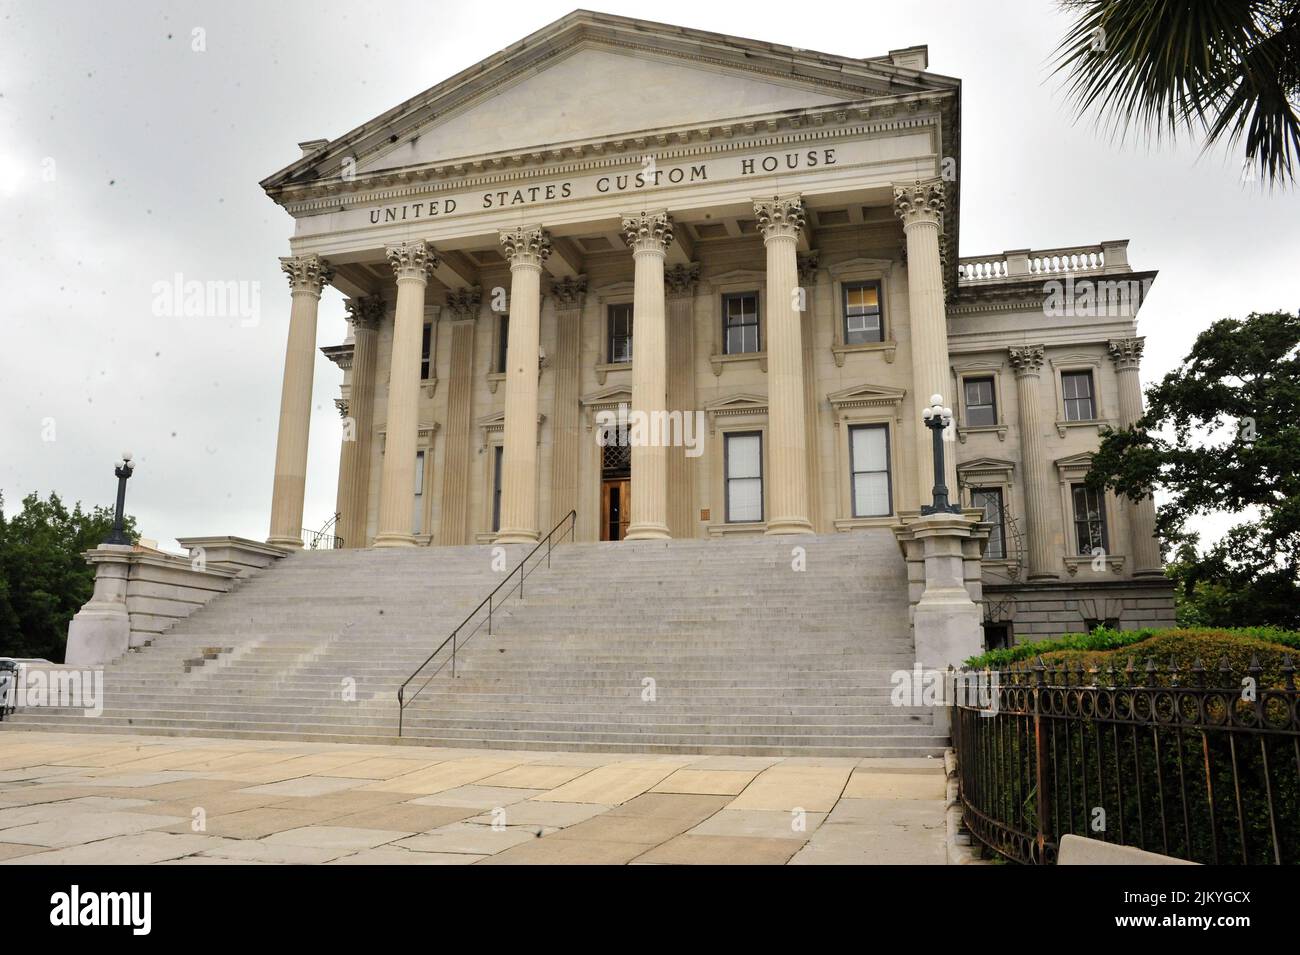 A beautiful shot of the United States Custom House against cloudy sky during daytime in Charleston, South Carolina, United States Stock Photo